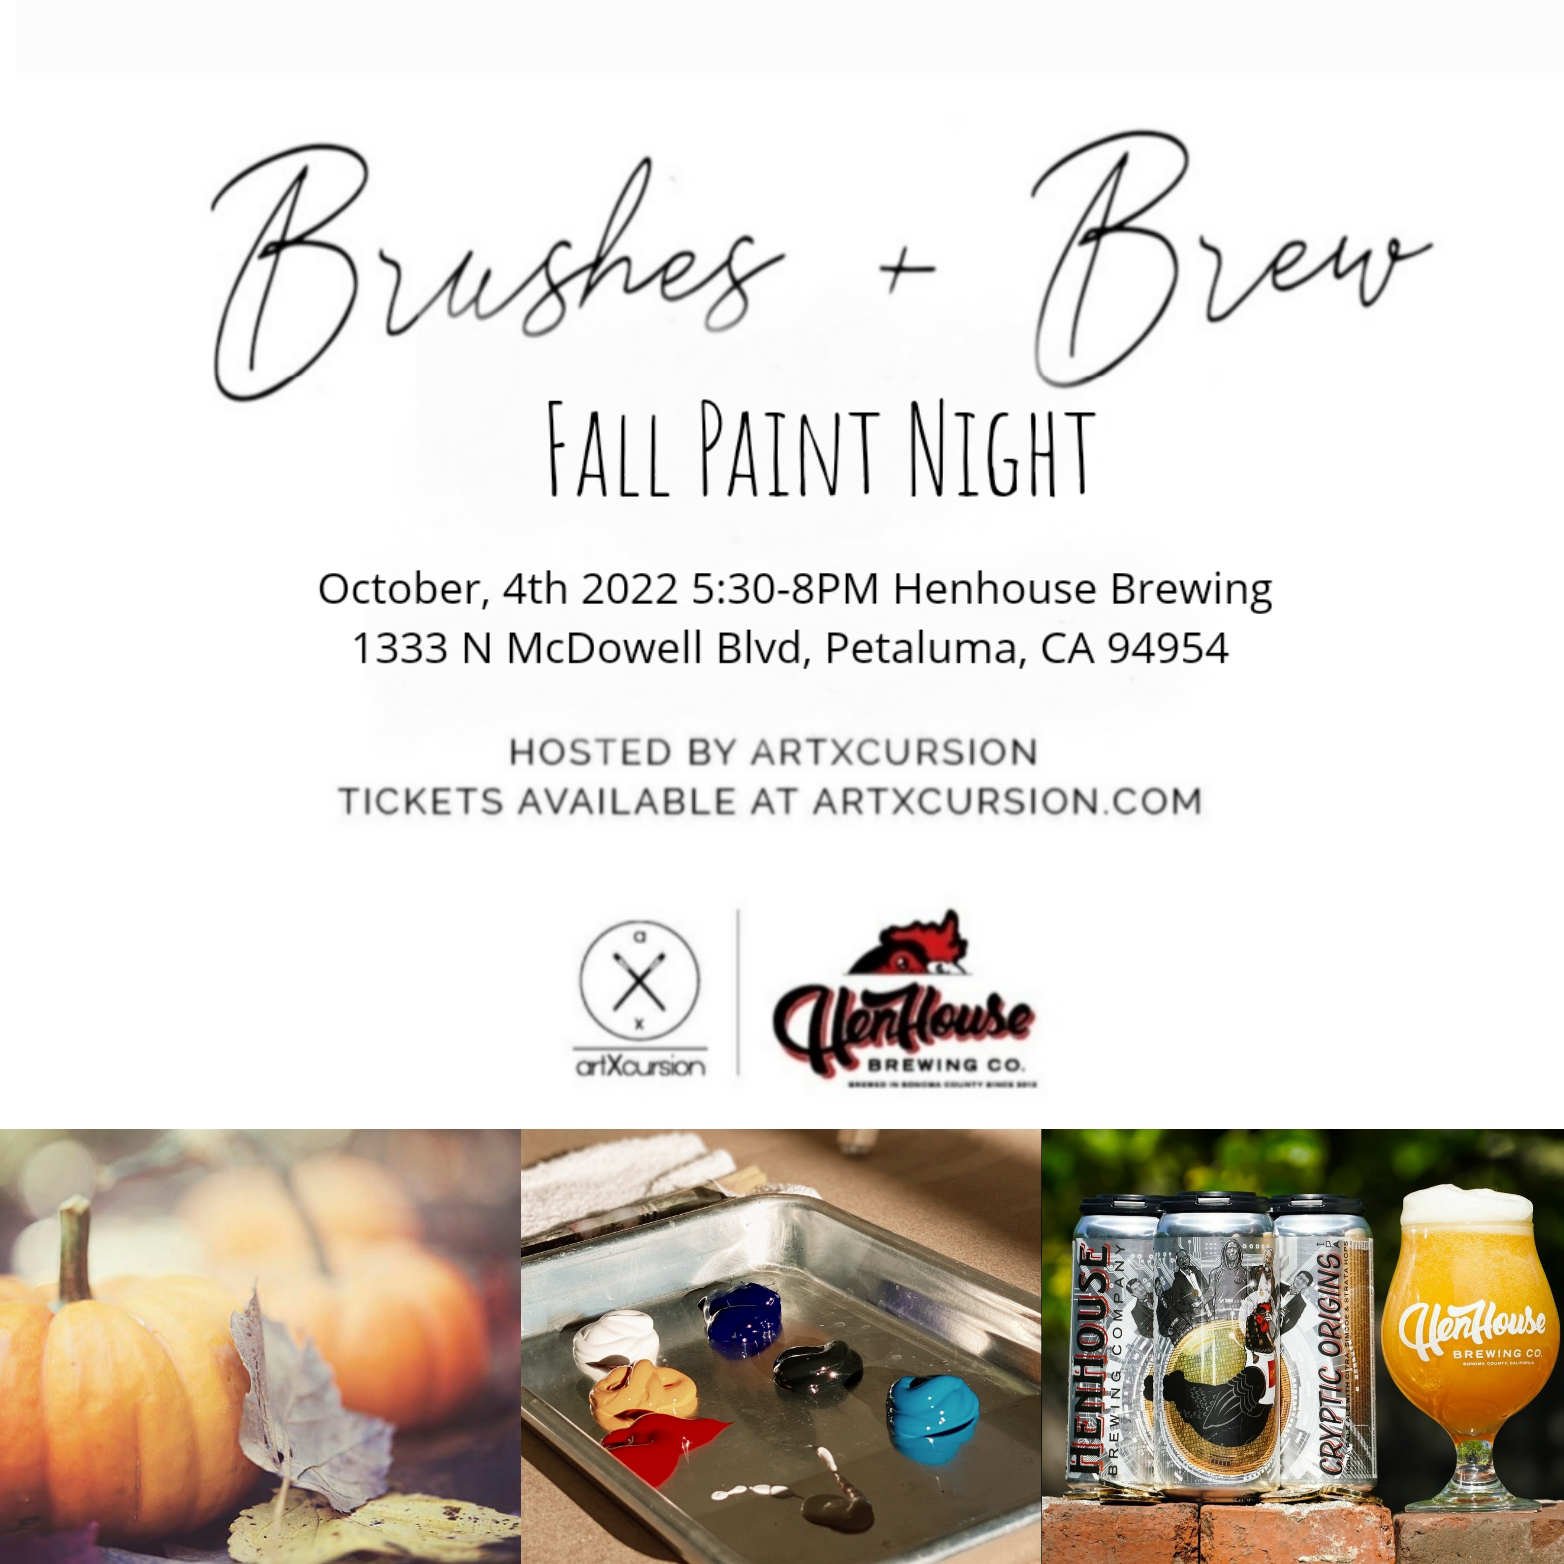 Brushes and Brews Fall Paint Night